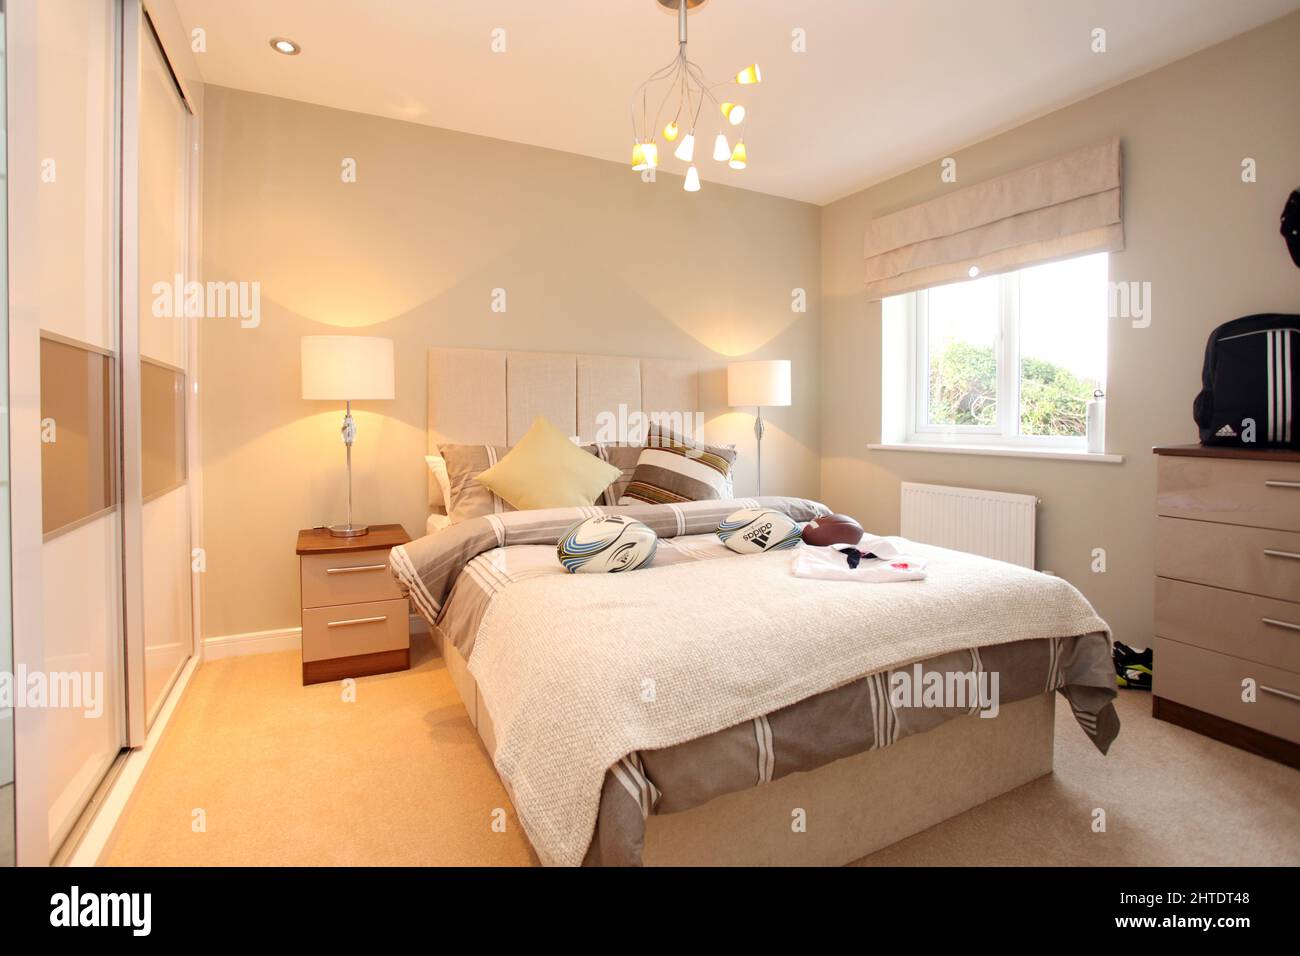 Modern boys bedroom in new build home, rugby theme, bedspread,beige neutral colour scheme,tall padded feature headboard,rugby balls, boys bedroom, Stock Photo